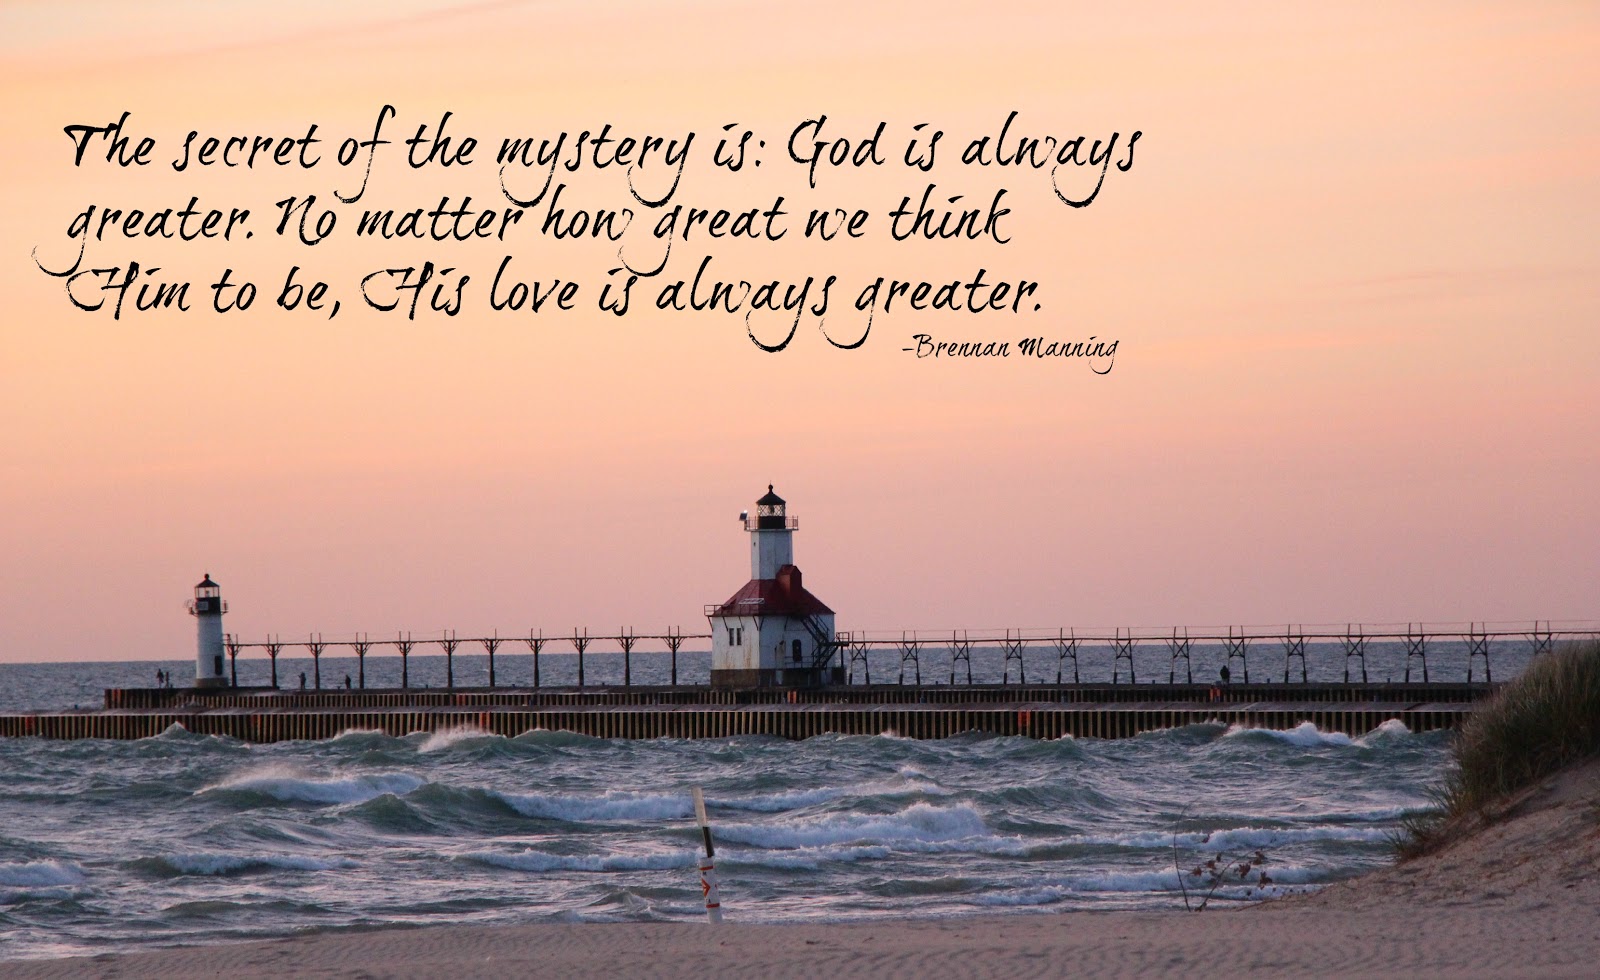 Lighthouse Quotes About God. QuotesGram